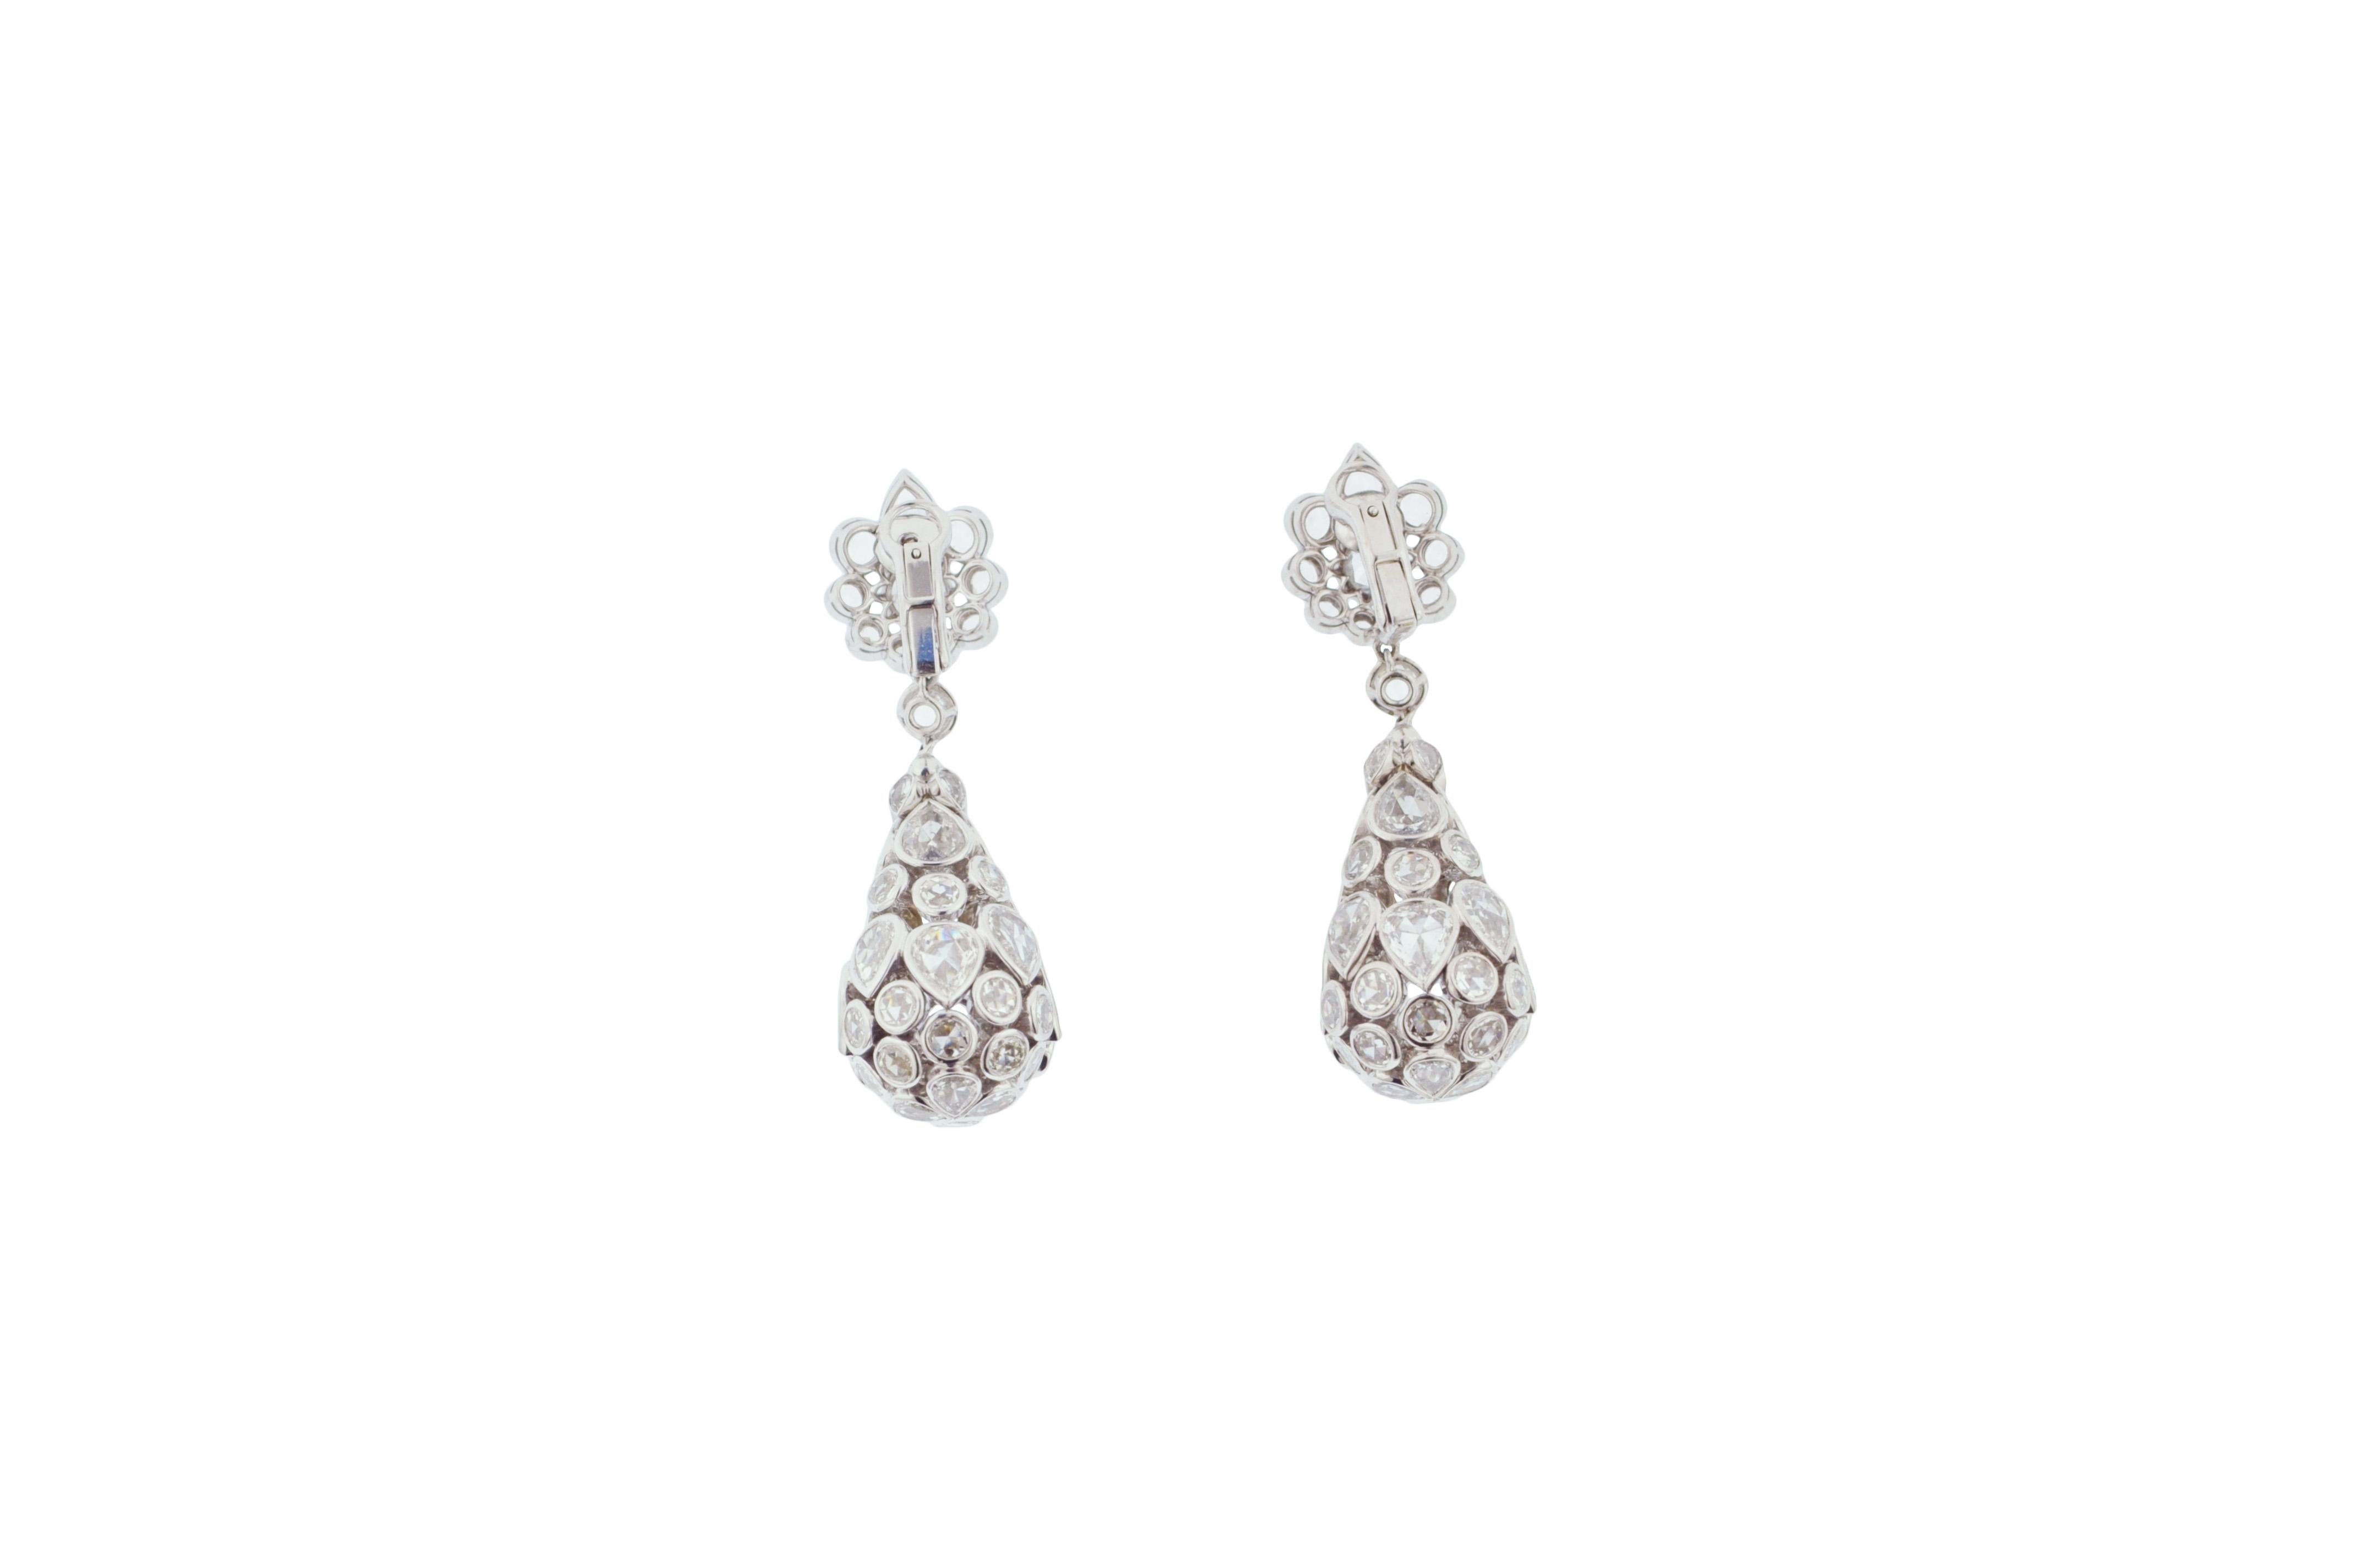 Rose-Cut Diamond and Gold Drop Earrings In Excellent Condition For Sale In New York, NY